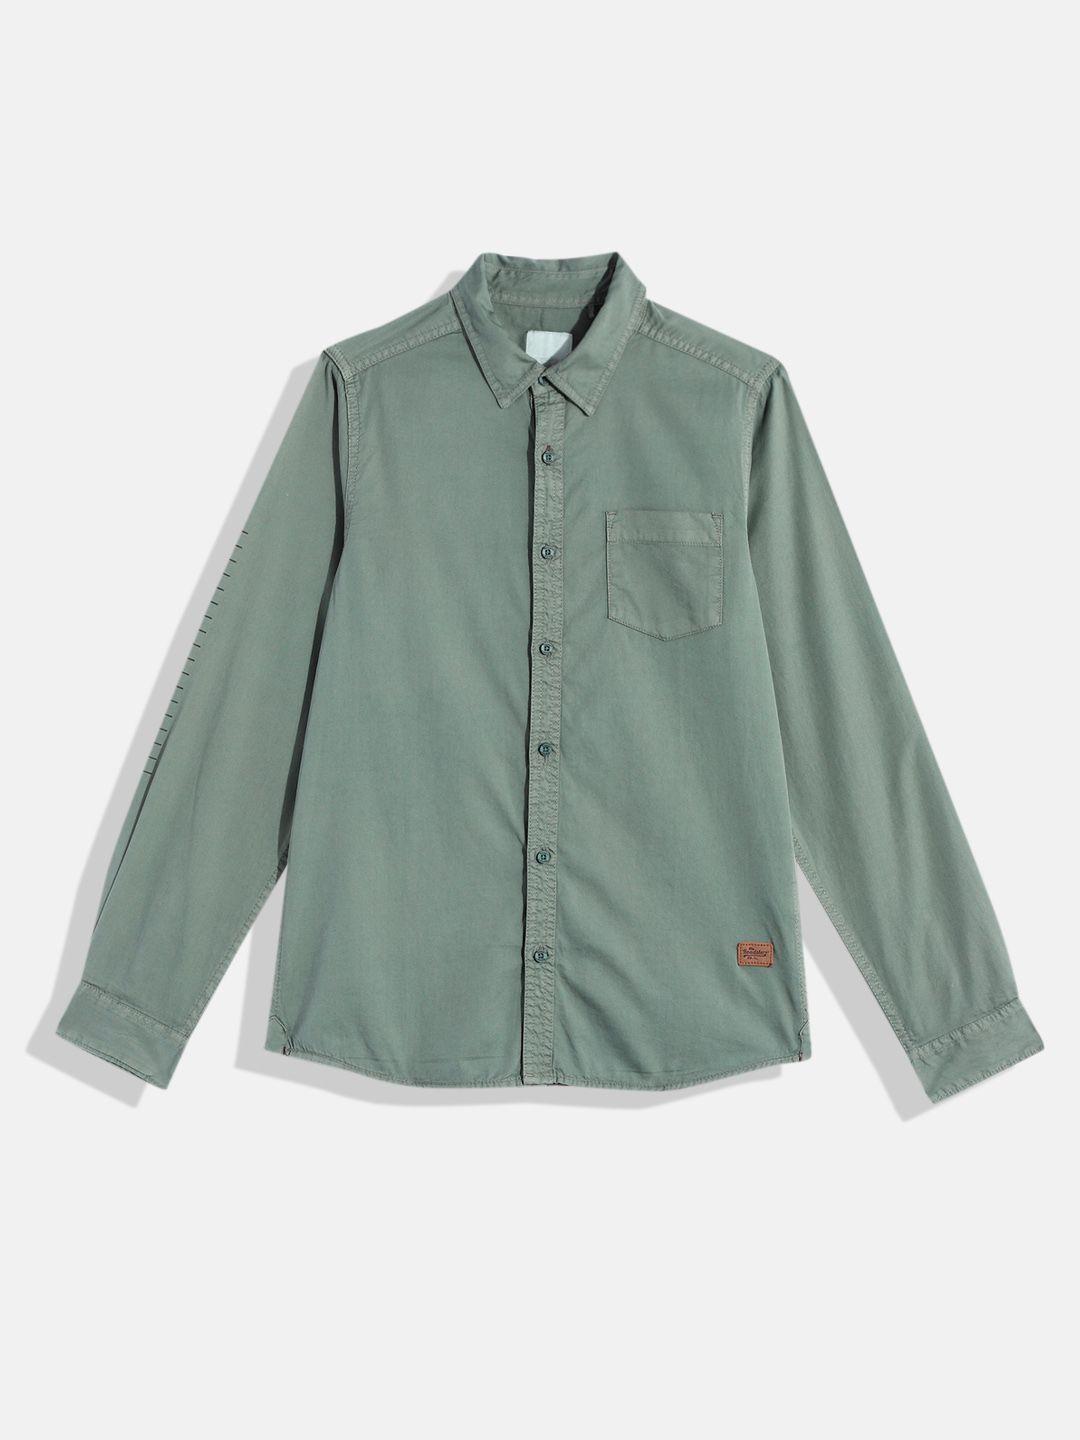 uth by roadster boys green regular fit solid opaque pure cotton casual denim shirt